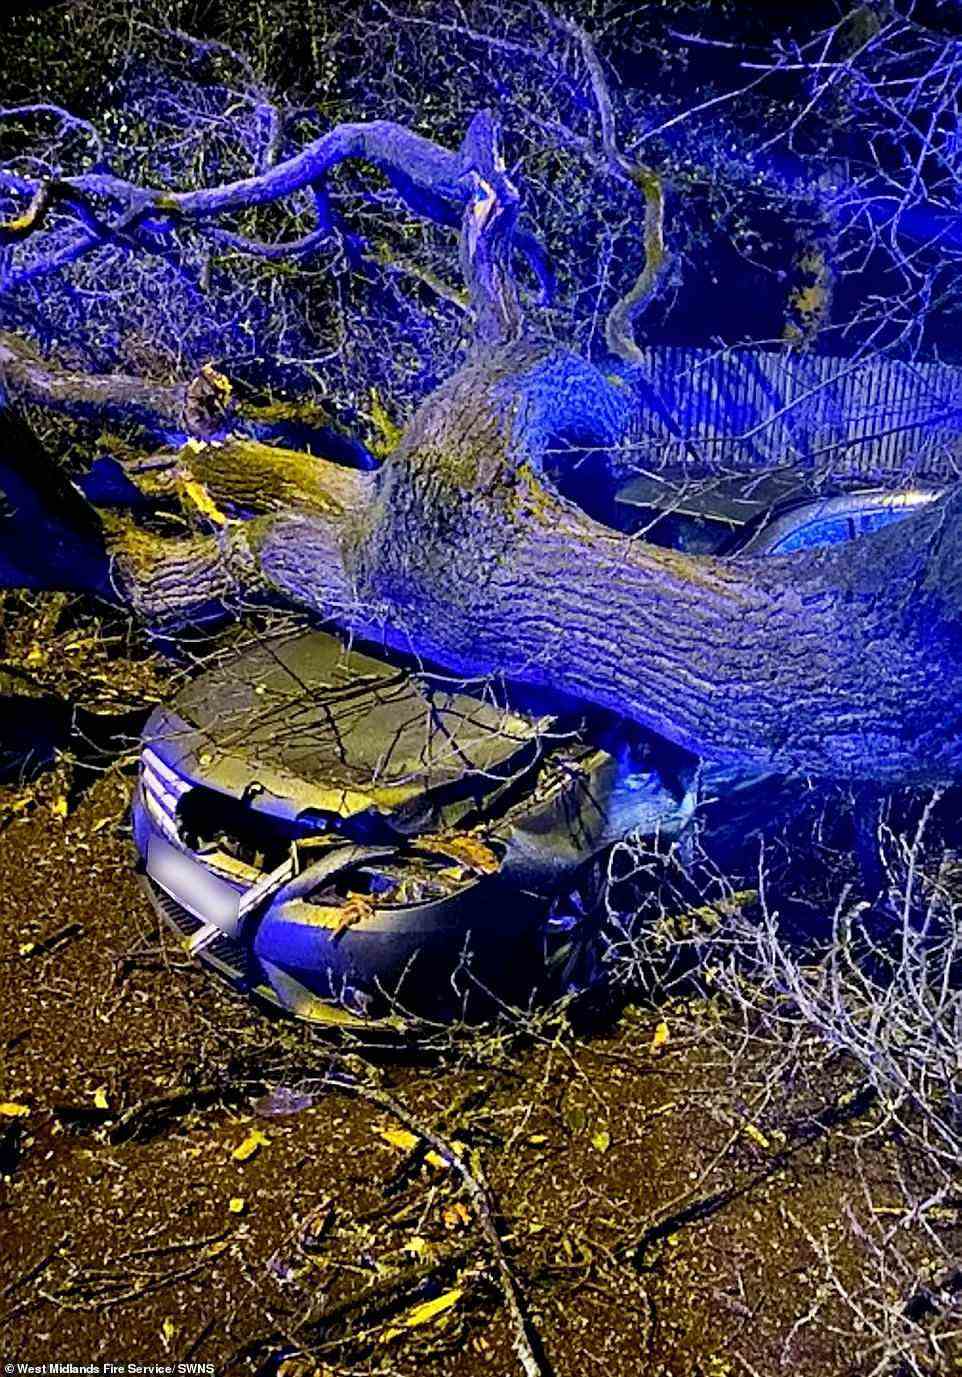 A tree crashed onto a car in Sutton Coldfield last night but fire crews said it was a 'very lucky escape' for the two people inside